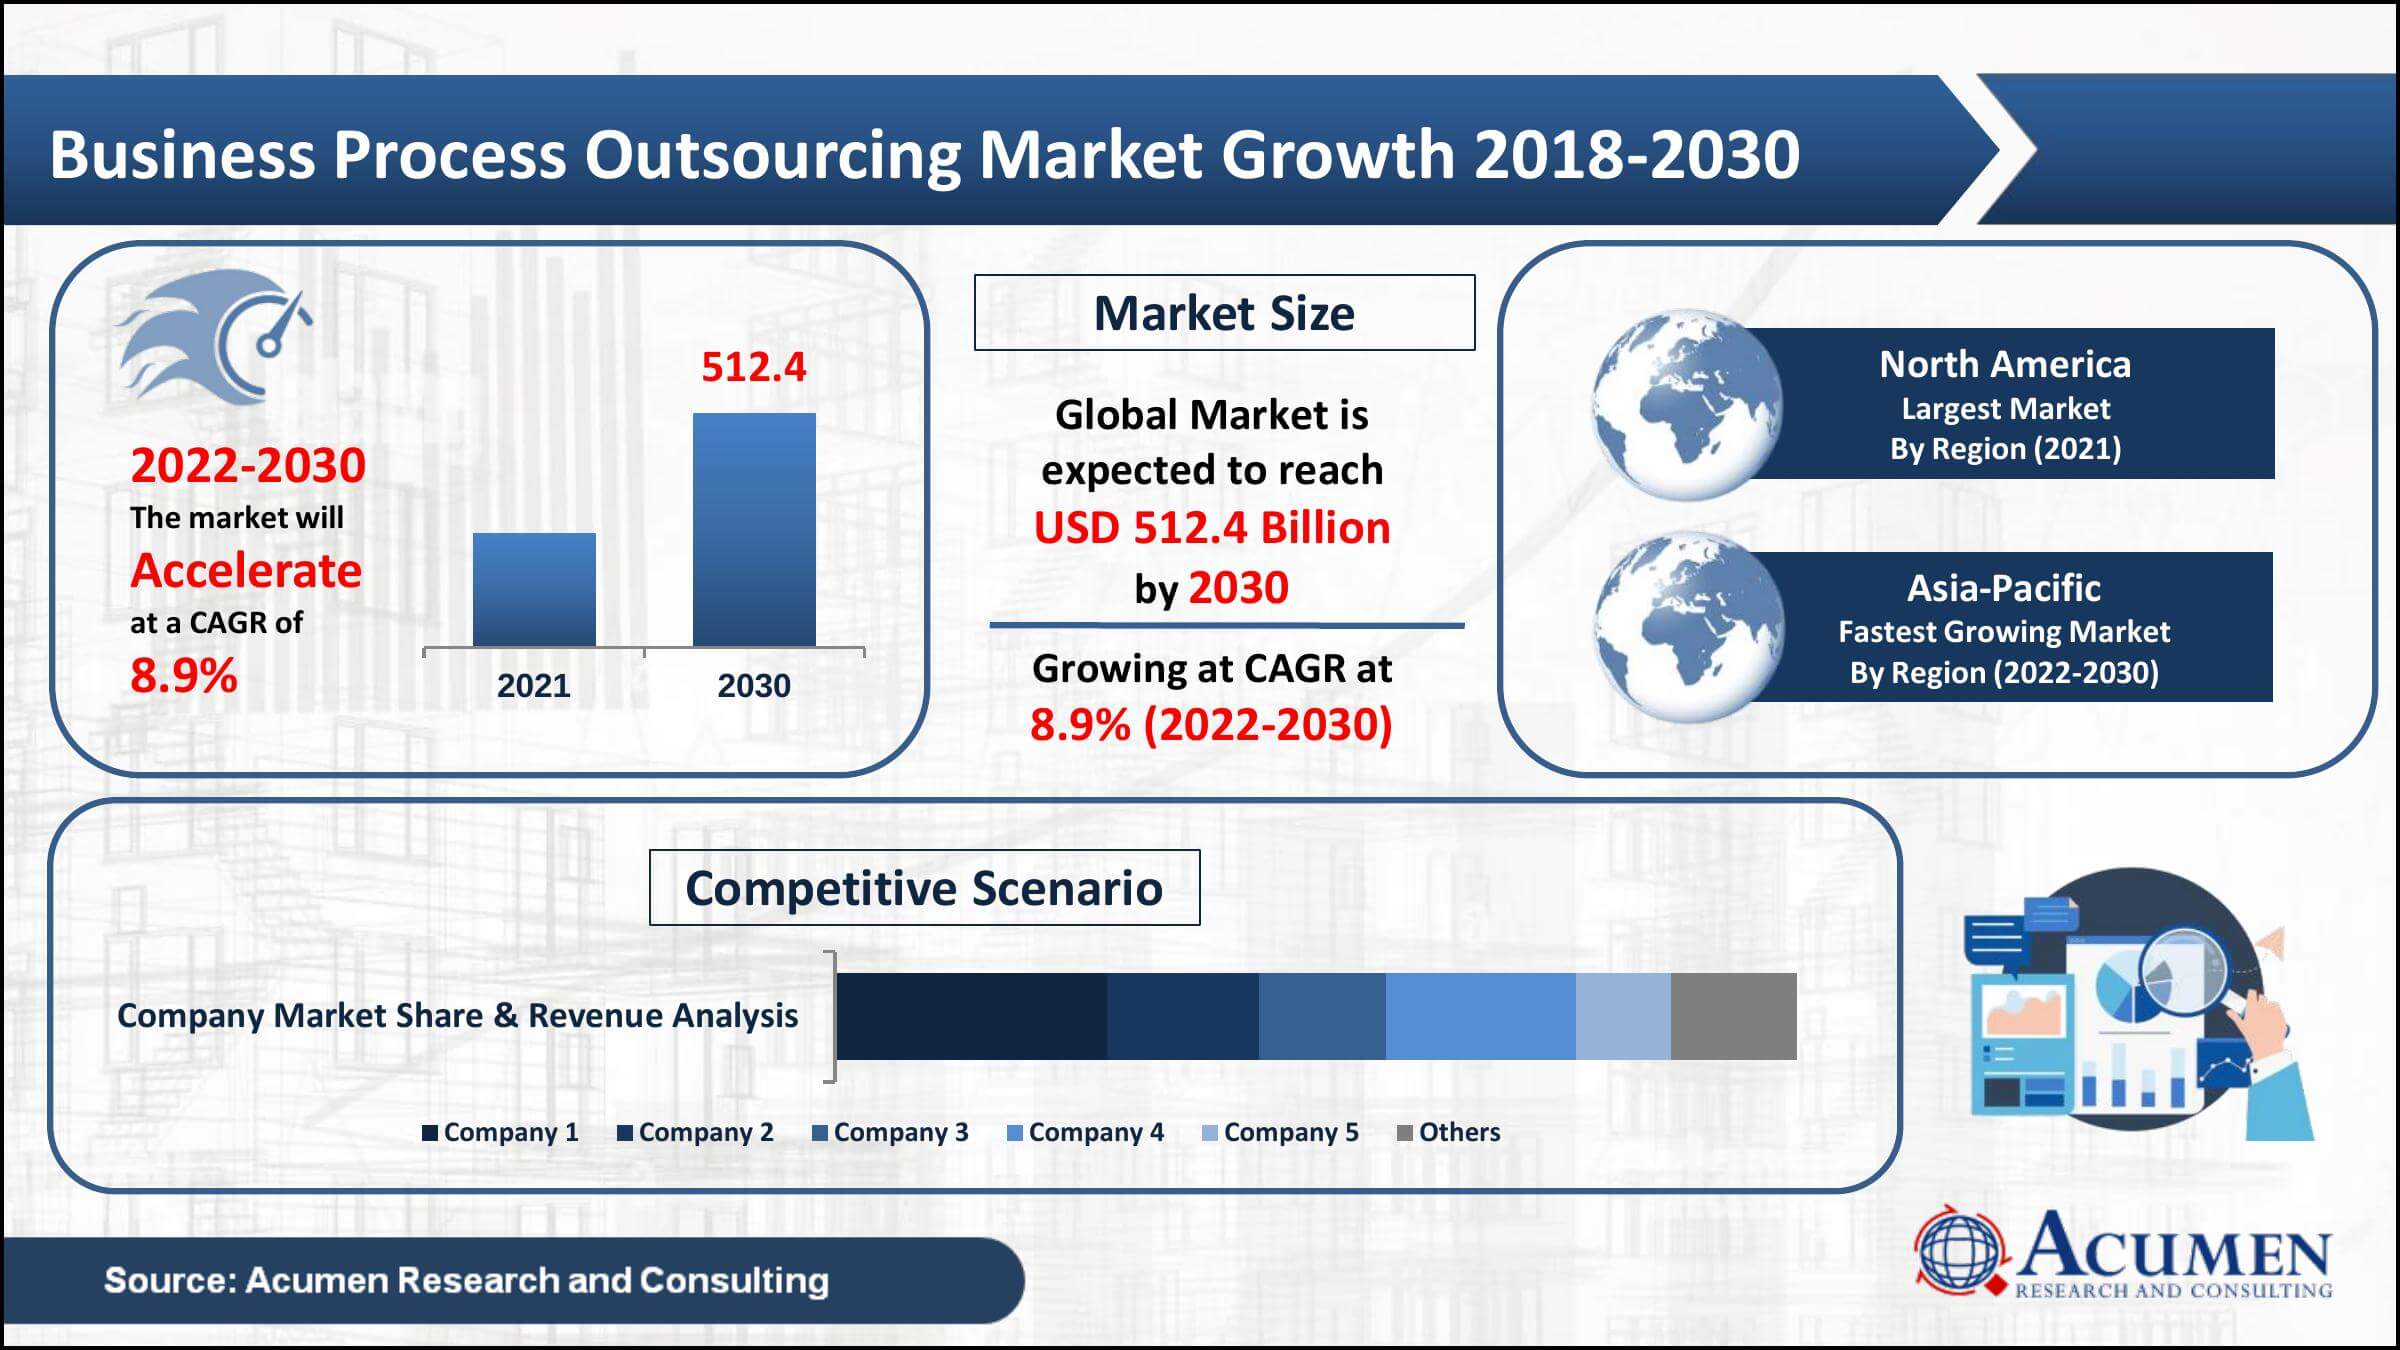 Global business process outsourcing market revenue collected USD 241.7 Billion in 2021, with a 8.9% CAGR between 2022 and 2030